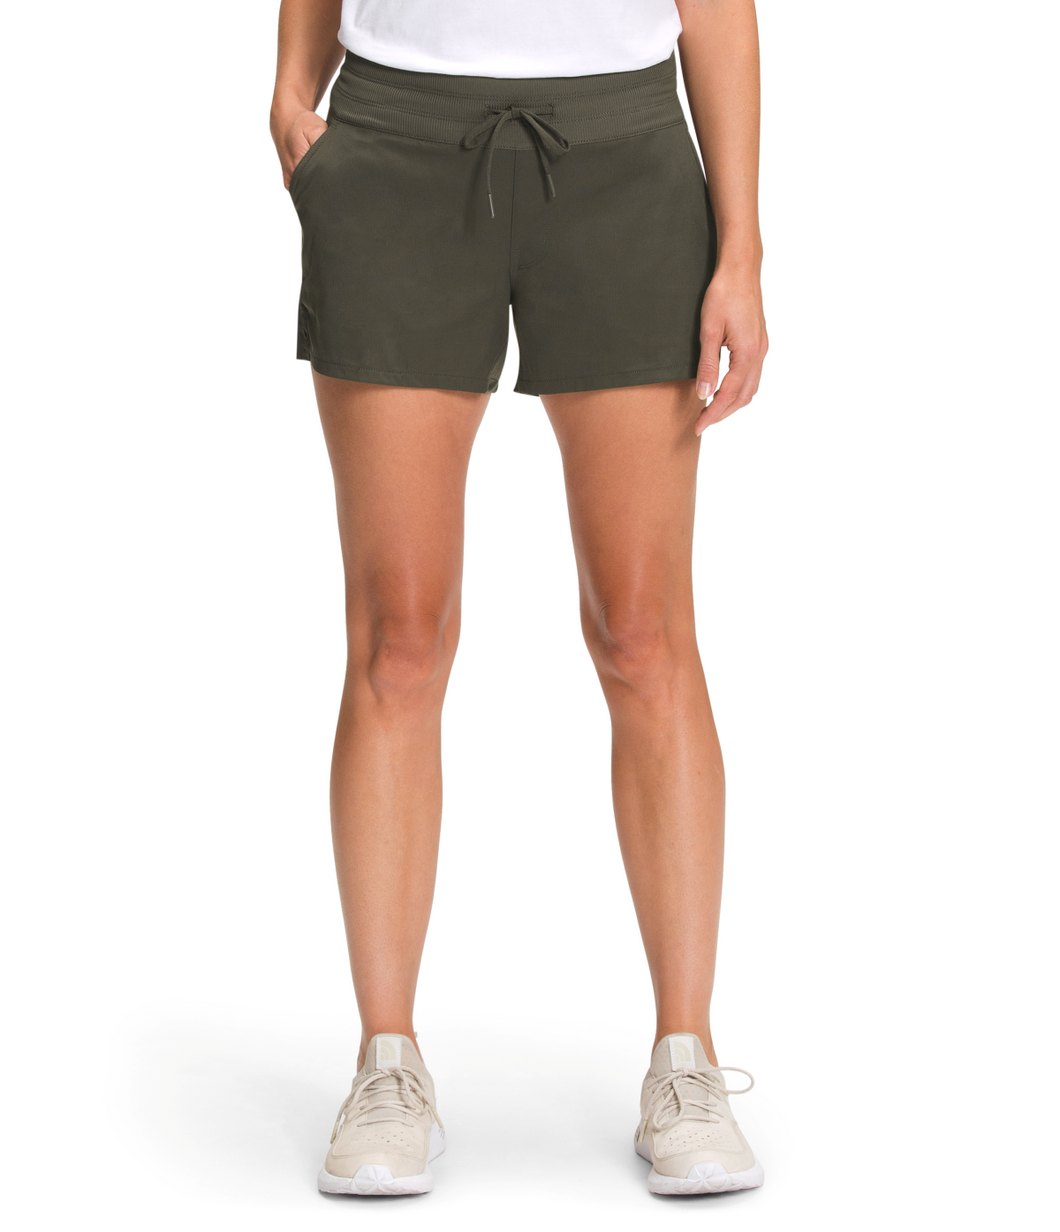 'The North Face' Women's Aphrodite Motion Short - New Taupe Green